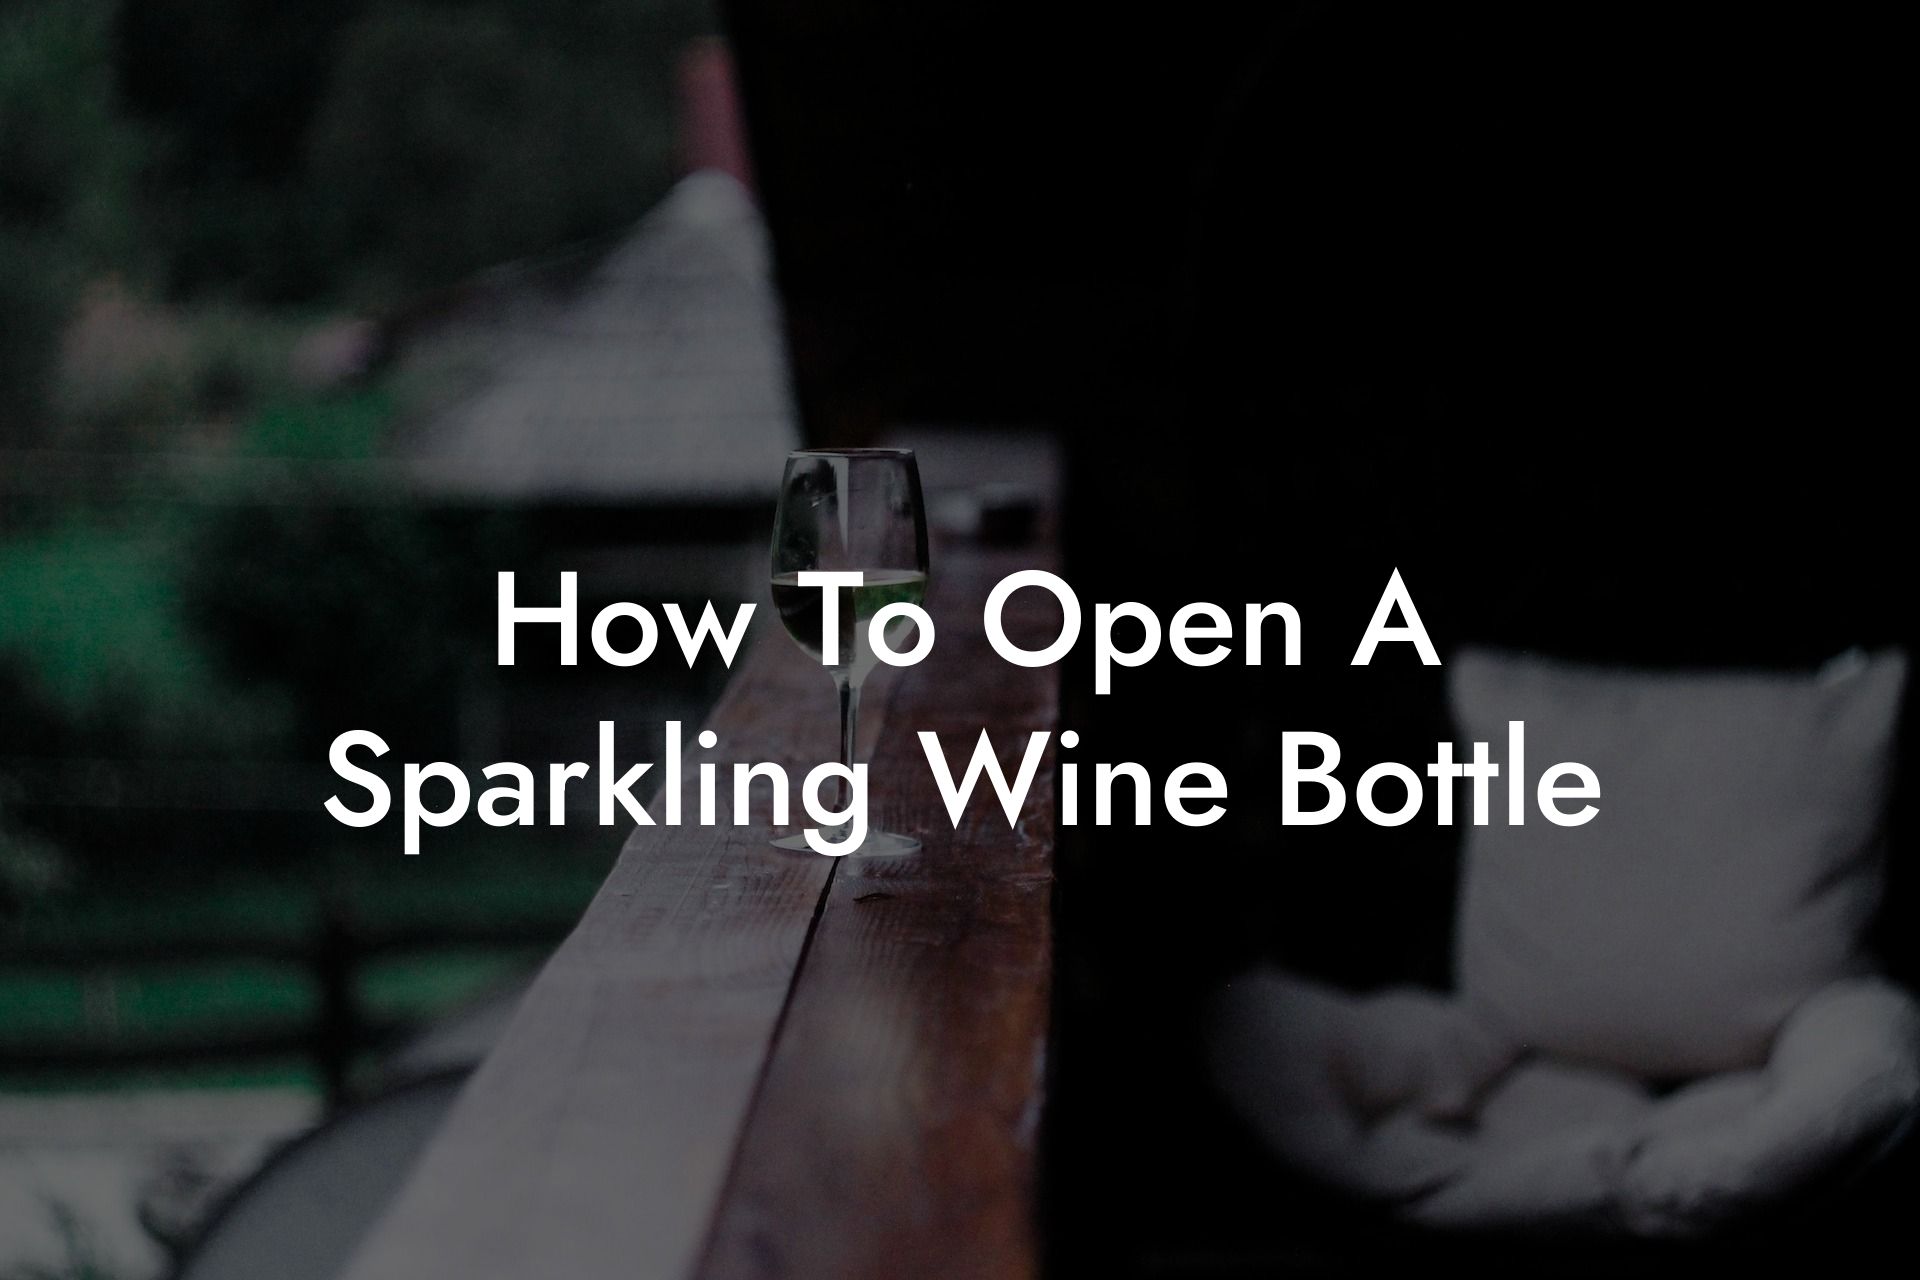 How To Open A Sparkling Wine Bottle